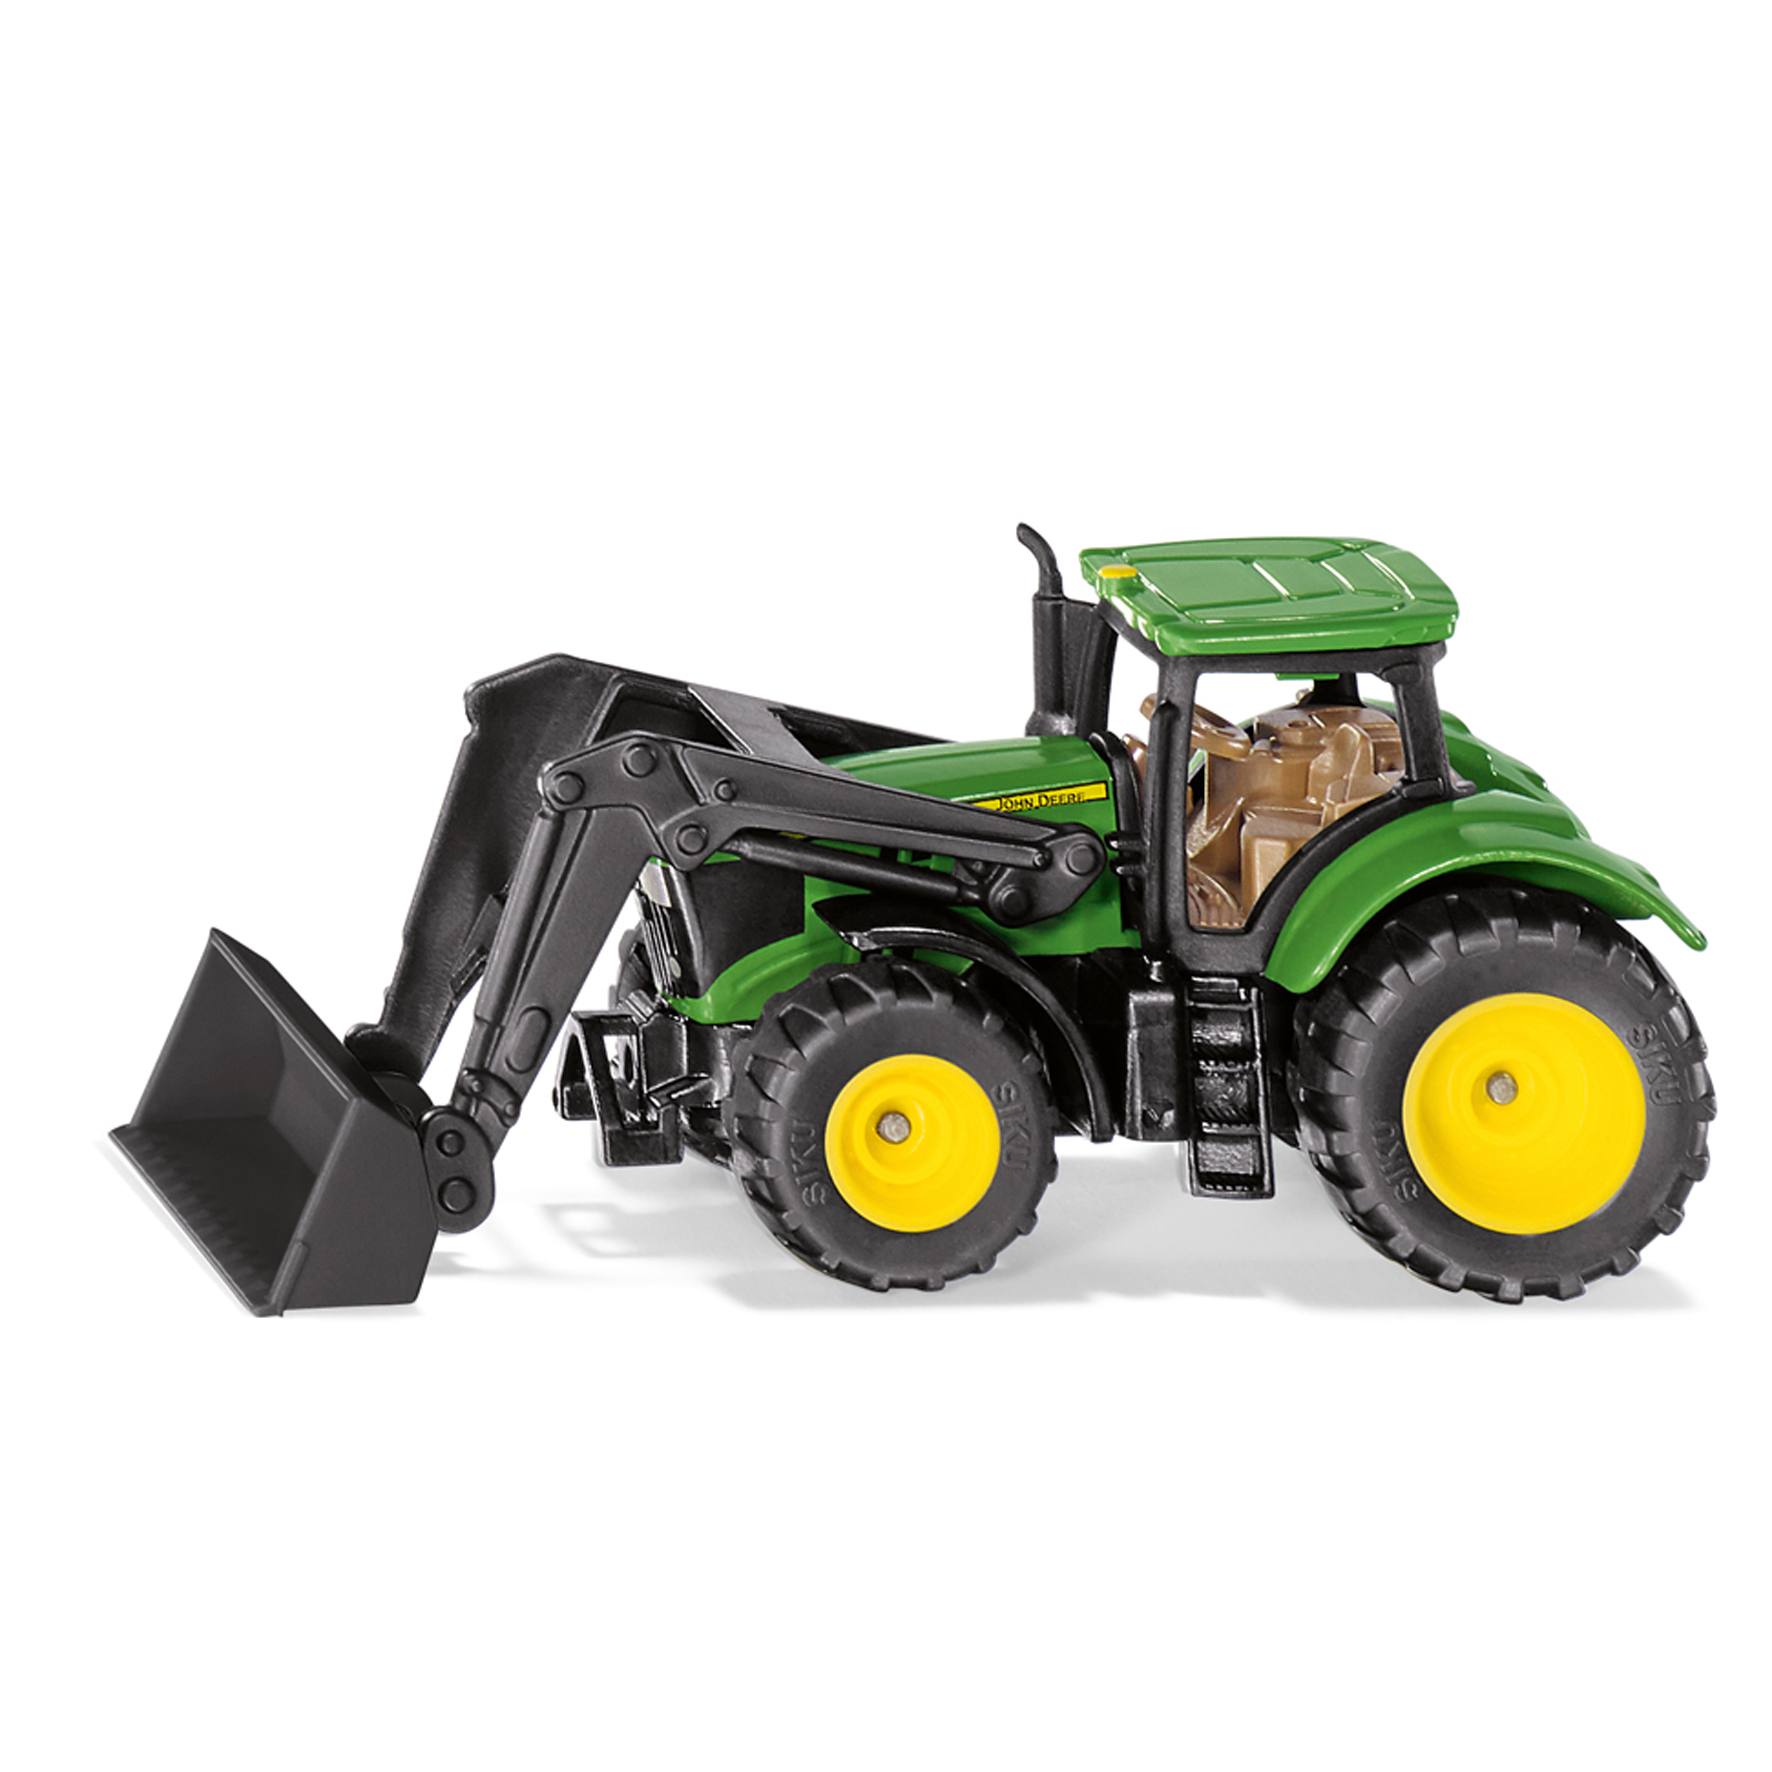 Tractors & Agricultural Vehicles john deere with front loader